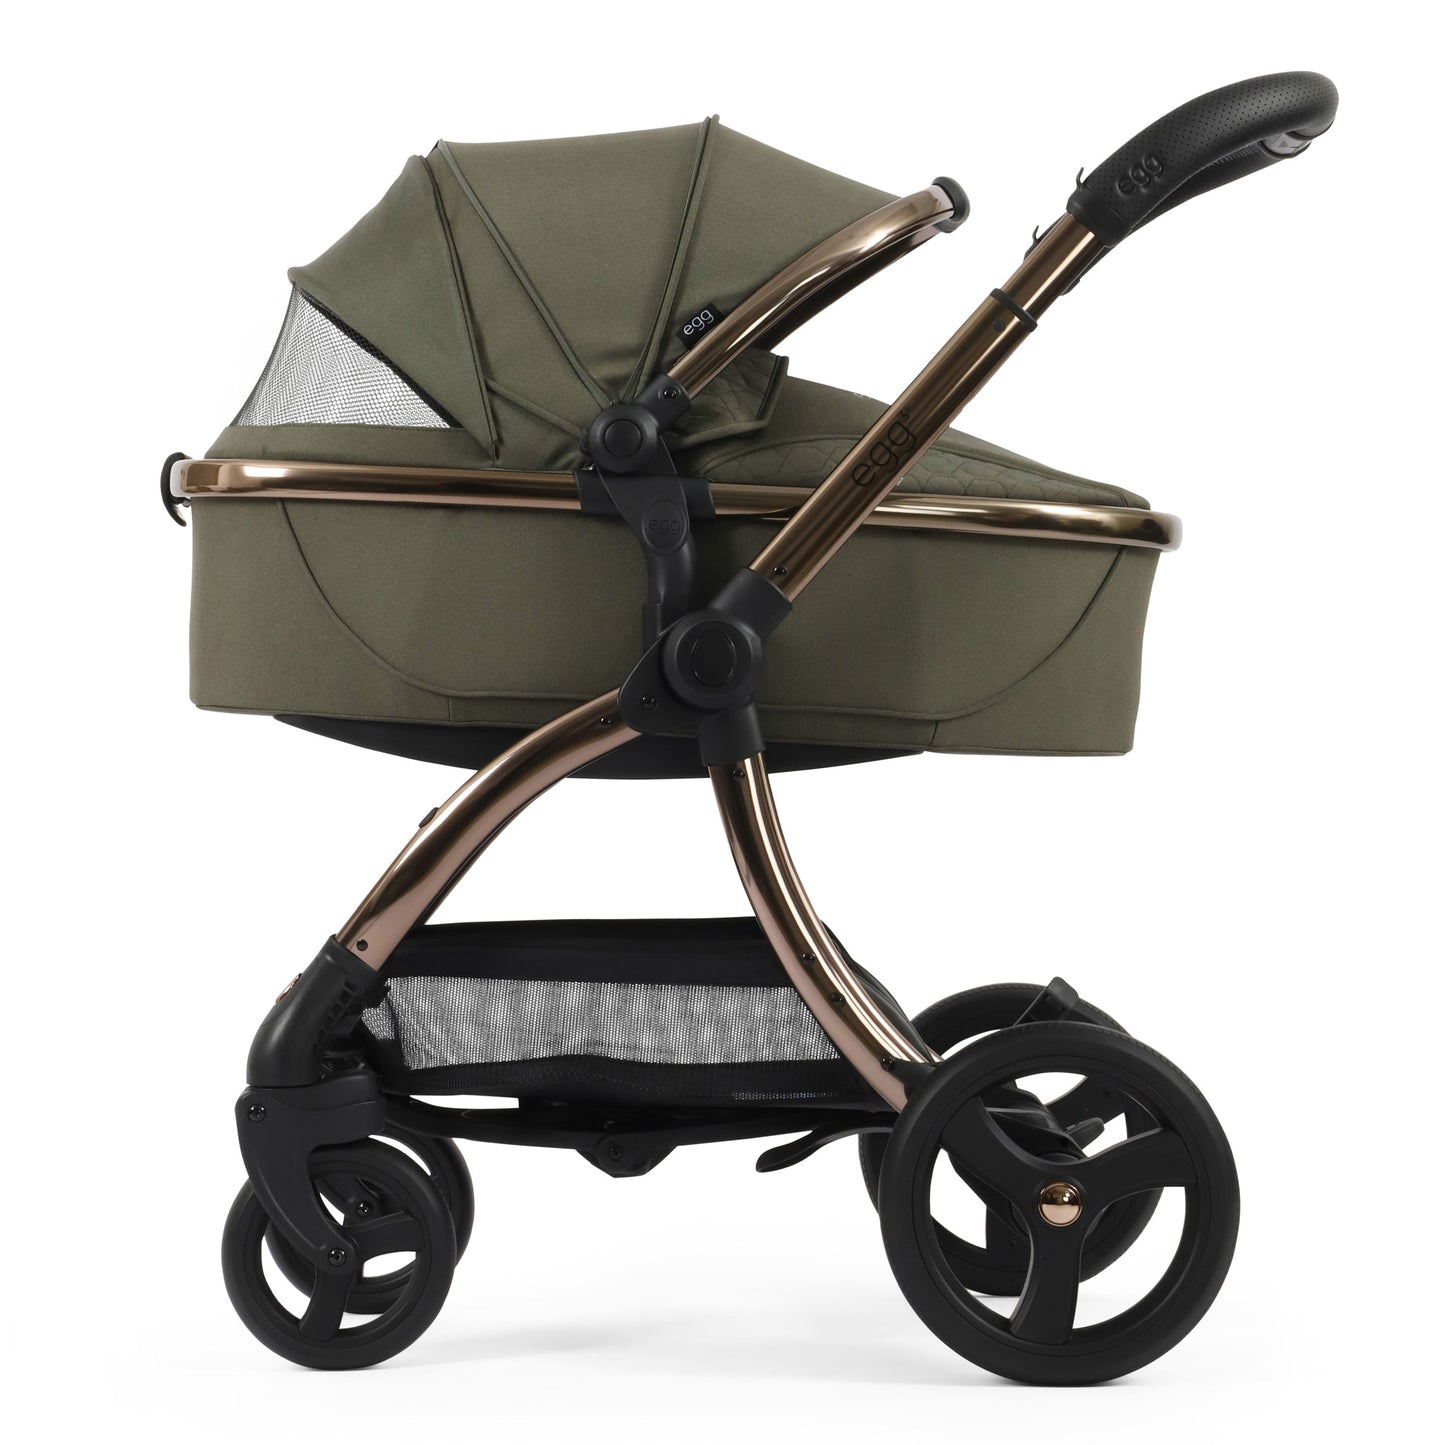 egg3® Carry Cot in Hunter Green